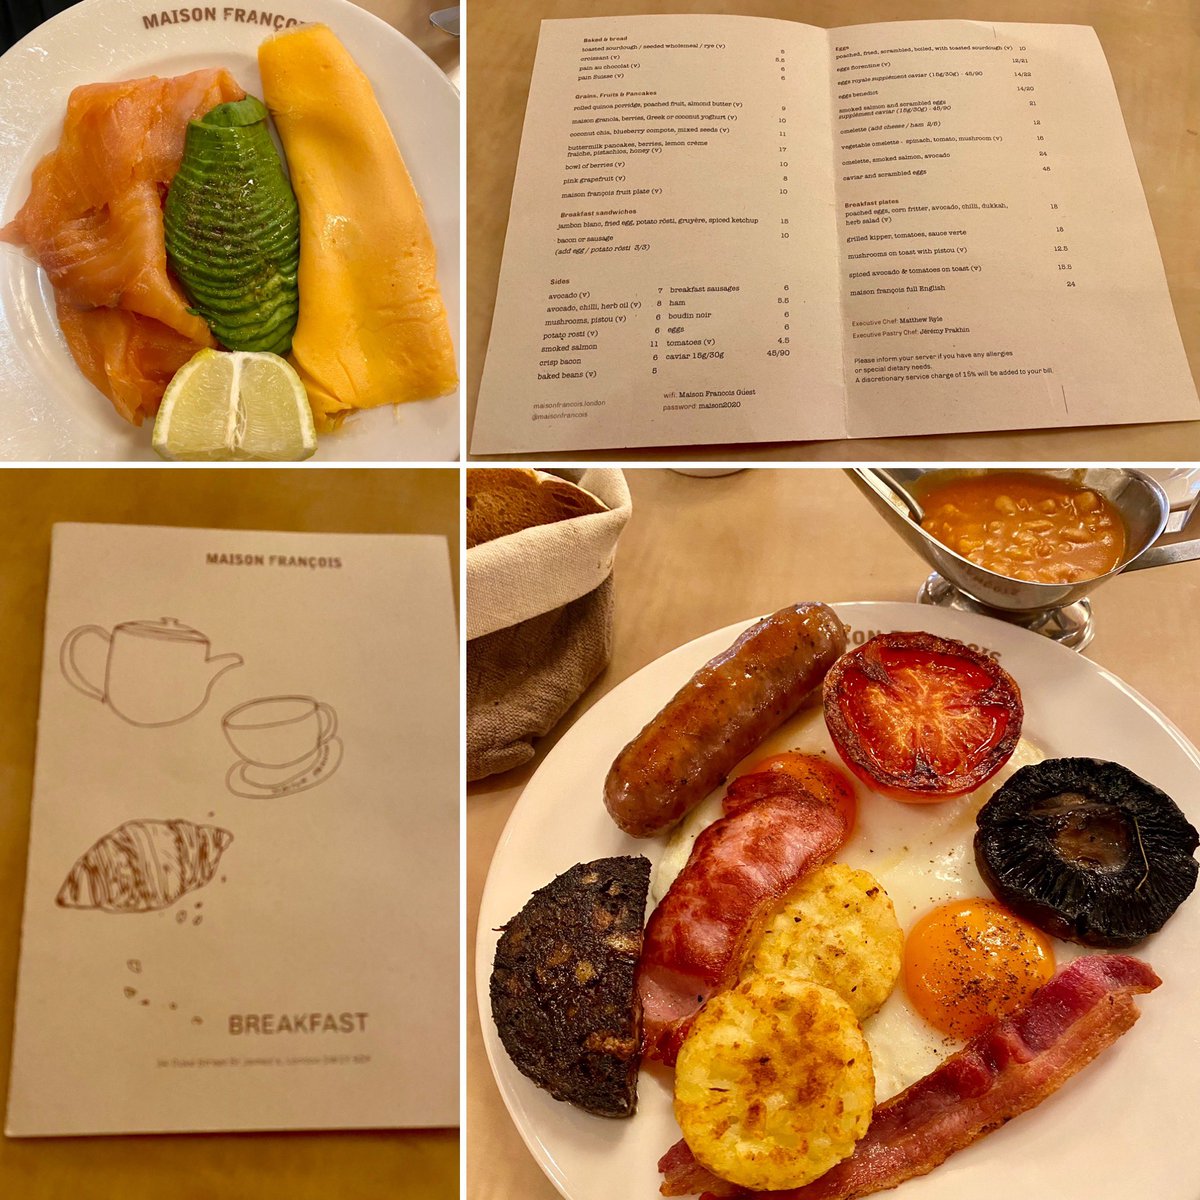 Call me what you like, but I still had a Full English at my breakfast meeting in one of London’s best French restaurants - and it was excellent. My colleague’s salmon, omelette and avocado was very good too, apparently. Highly recommend Maison Francois, Duke Street.